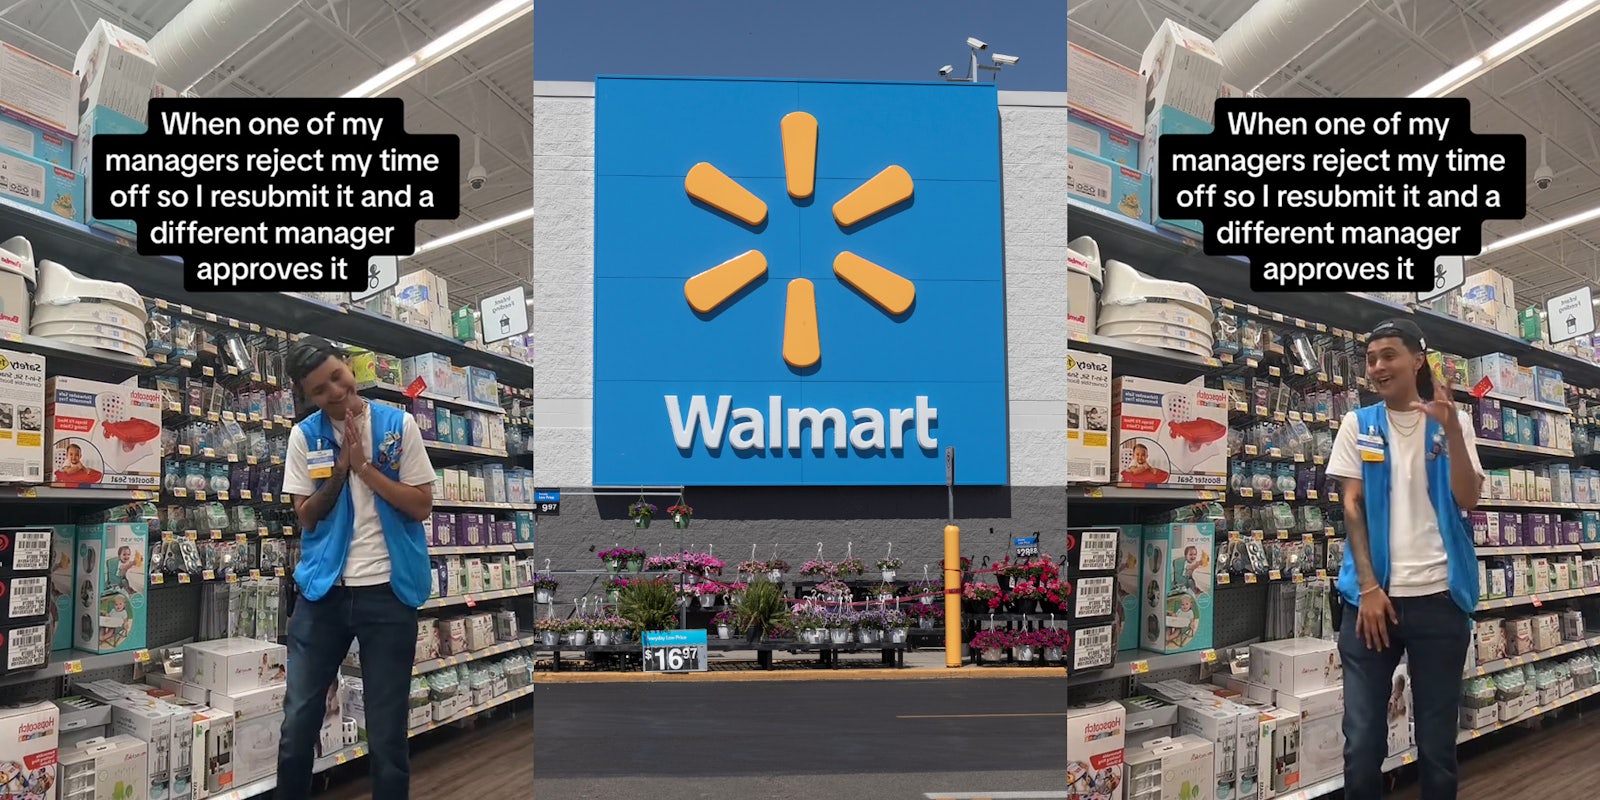 Walmart employee in aisle with caption 'When one of my managers reject my time off so I resubmit it and a different manager approves it' (l) Walmart building with sign (c) Walmart employee in aisle with caption 'When one of my managers reject my time off so I resubmit it and a different manager approves it' (r)